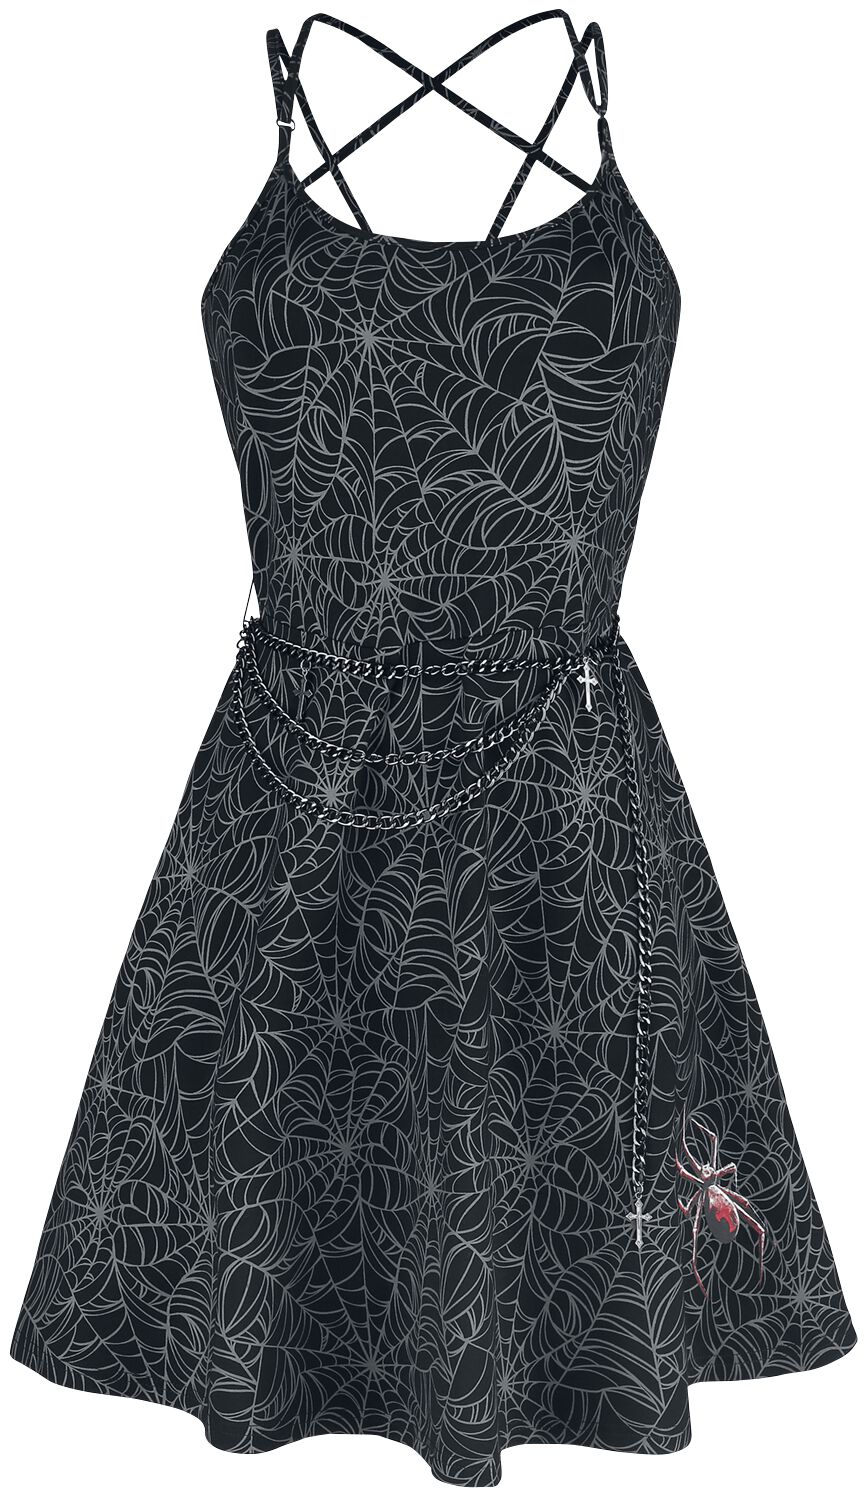 Gothicana by EMP Gothicana X Anne Stokes - Short Black Dress with Print and Chain Belt Short dress black